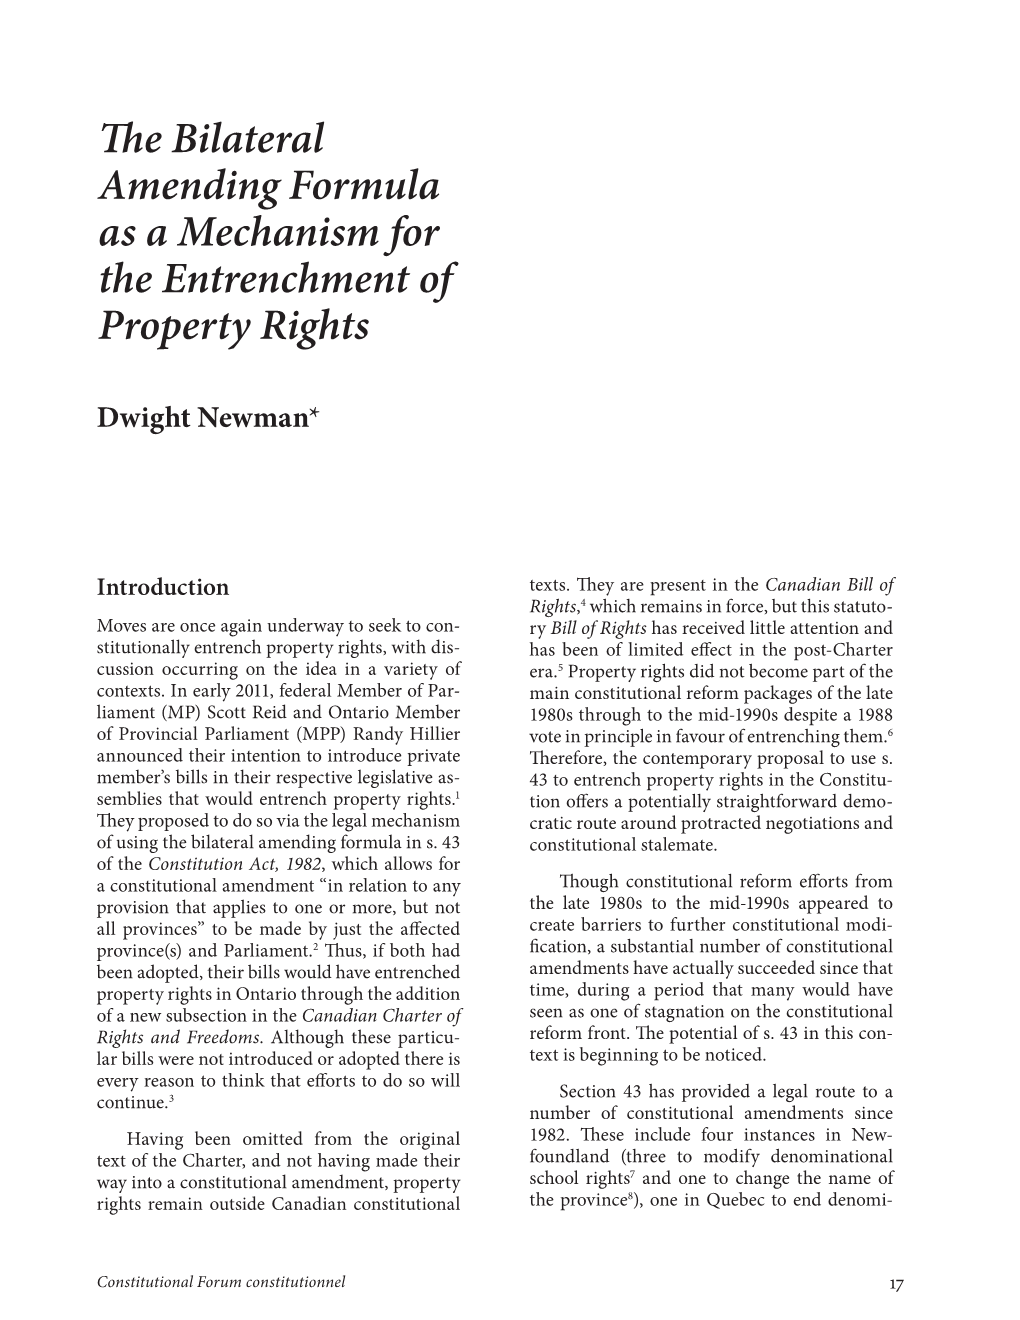 The Bilateral Amending Formula As a Mechanism for the Entrenchment of Property Rights